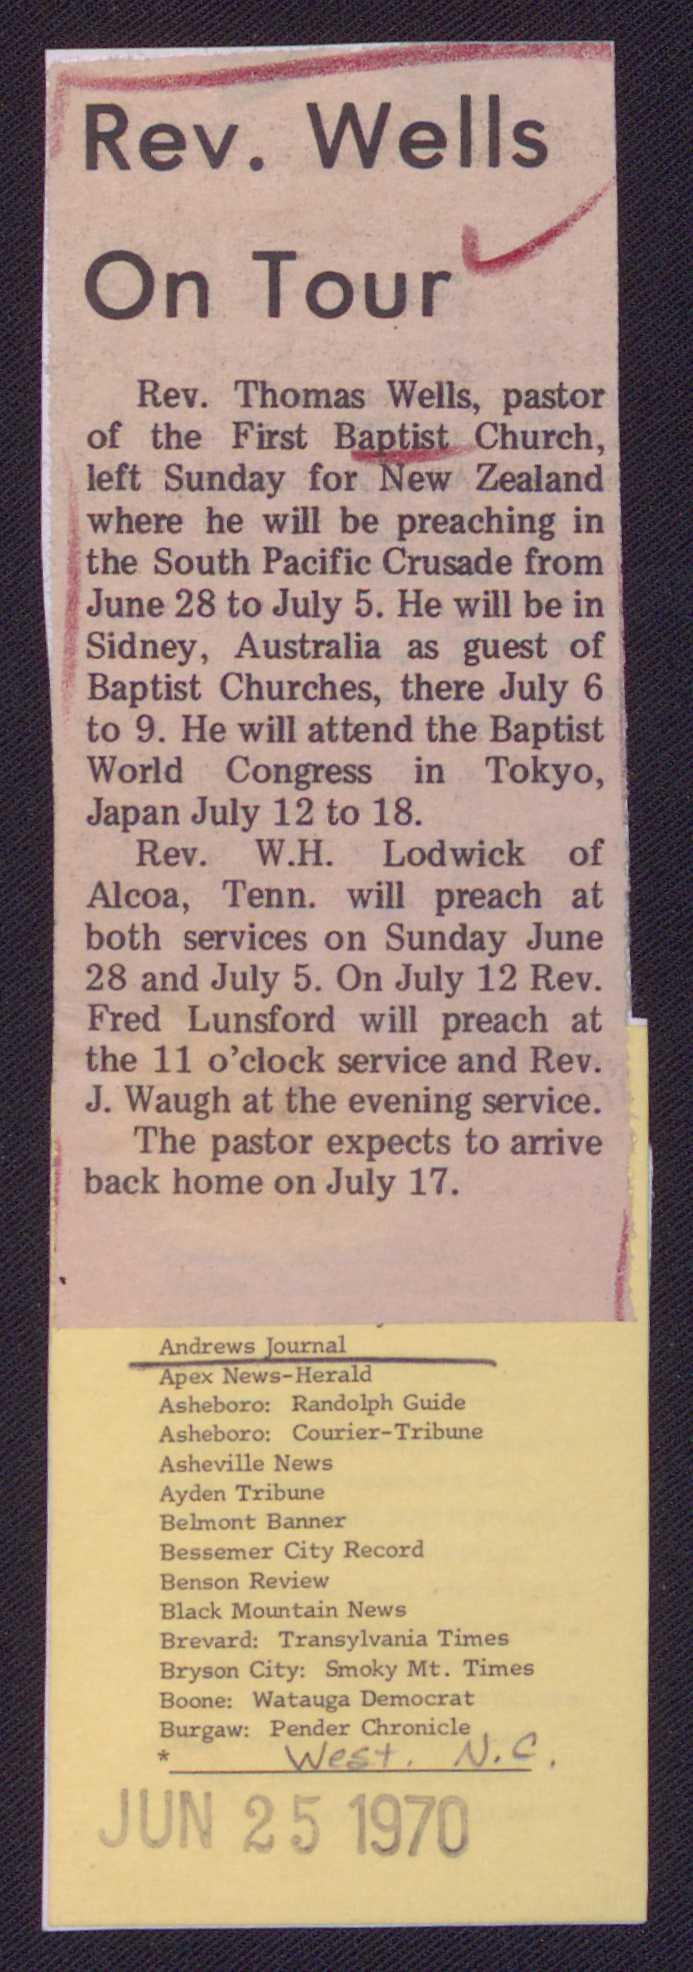 Rev. Wells On Tour Rev. Thomas Wells, pastor of the First B,,ruiliS Church, left Sunday for~ Zealand where he will be preaching in the South Pacific Crusade from June 28 to July 5.